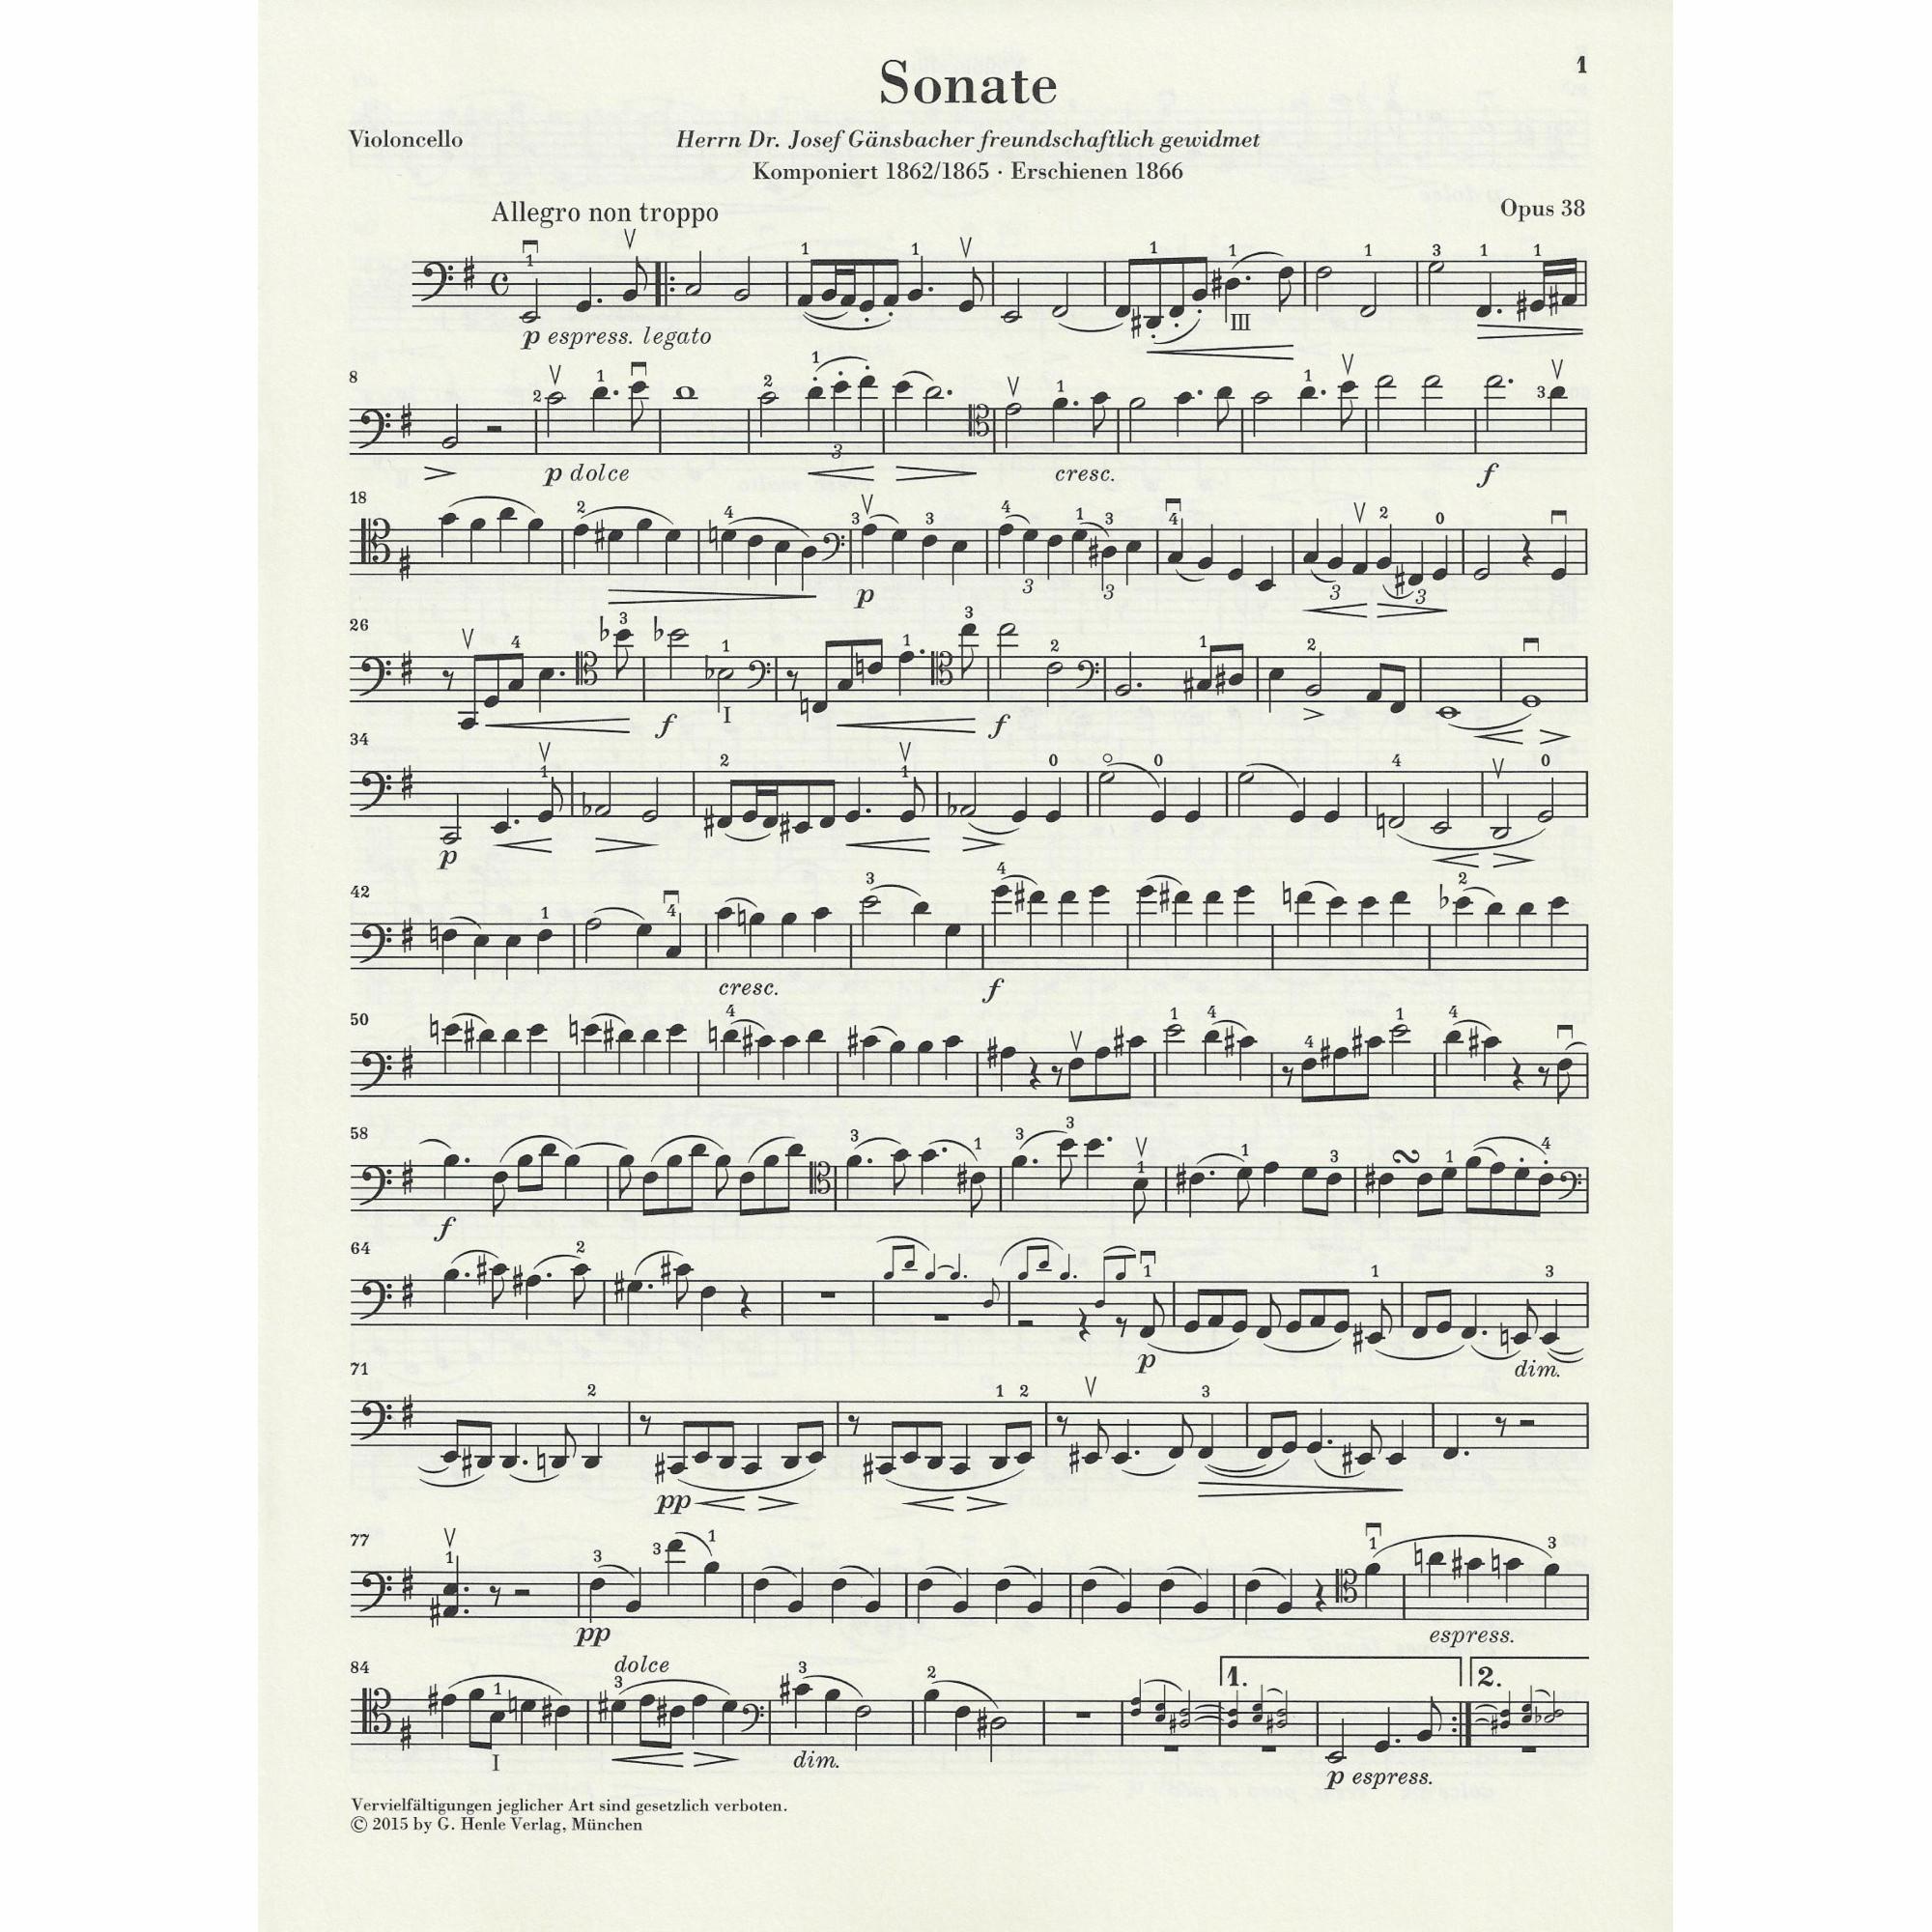 Sample: Marked Cello Part